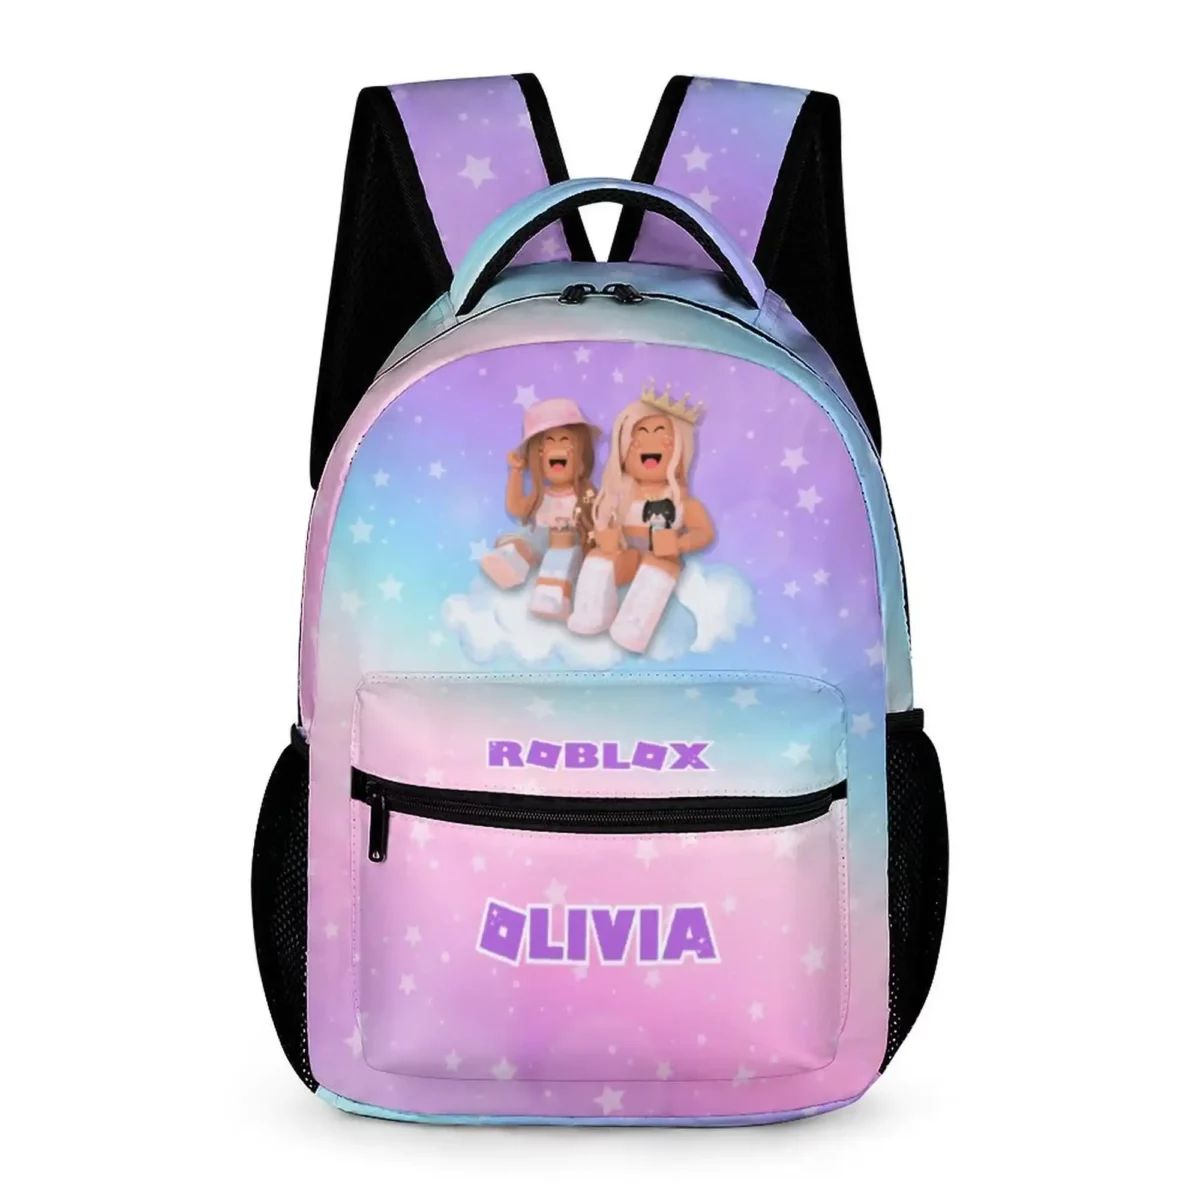 Personalized Pink and Purple, Roblox Avatars Girls Backpack with Customizable Name Cool Kiddo 12